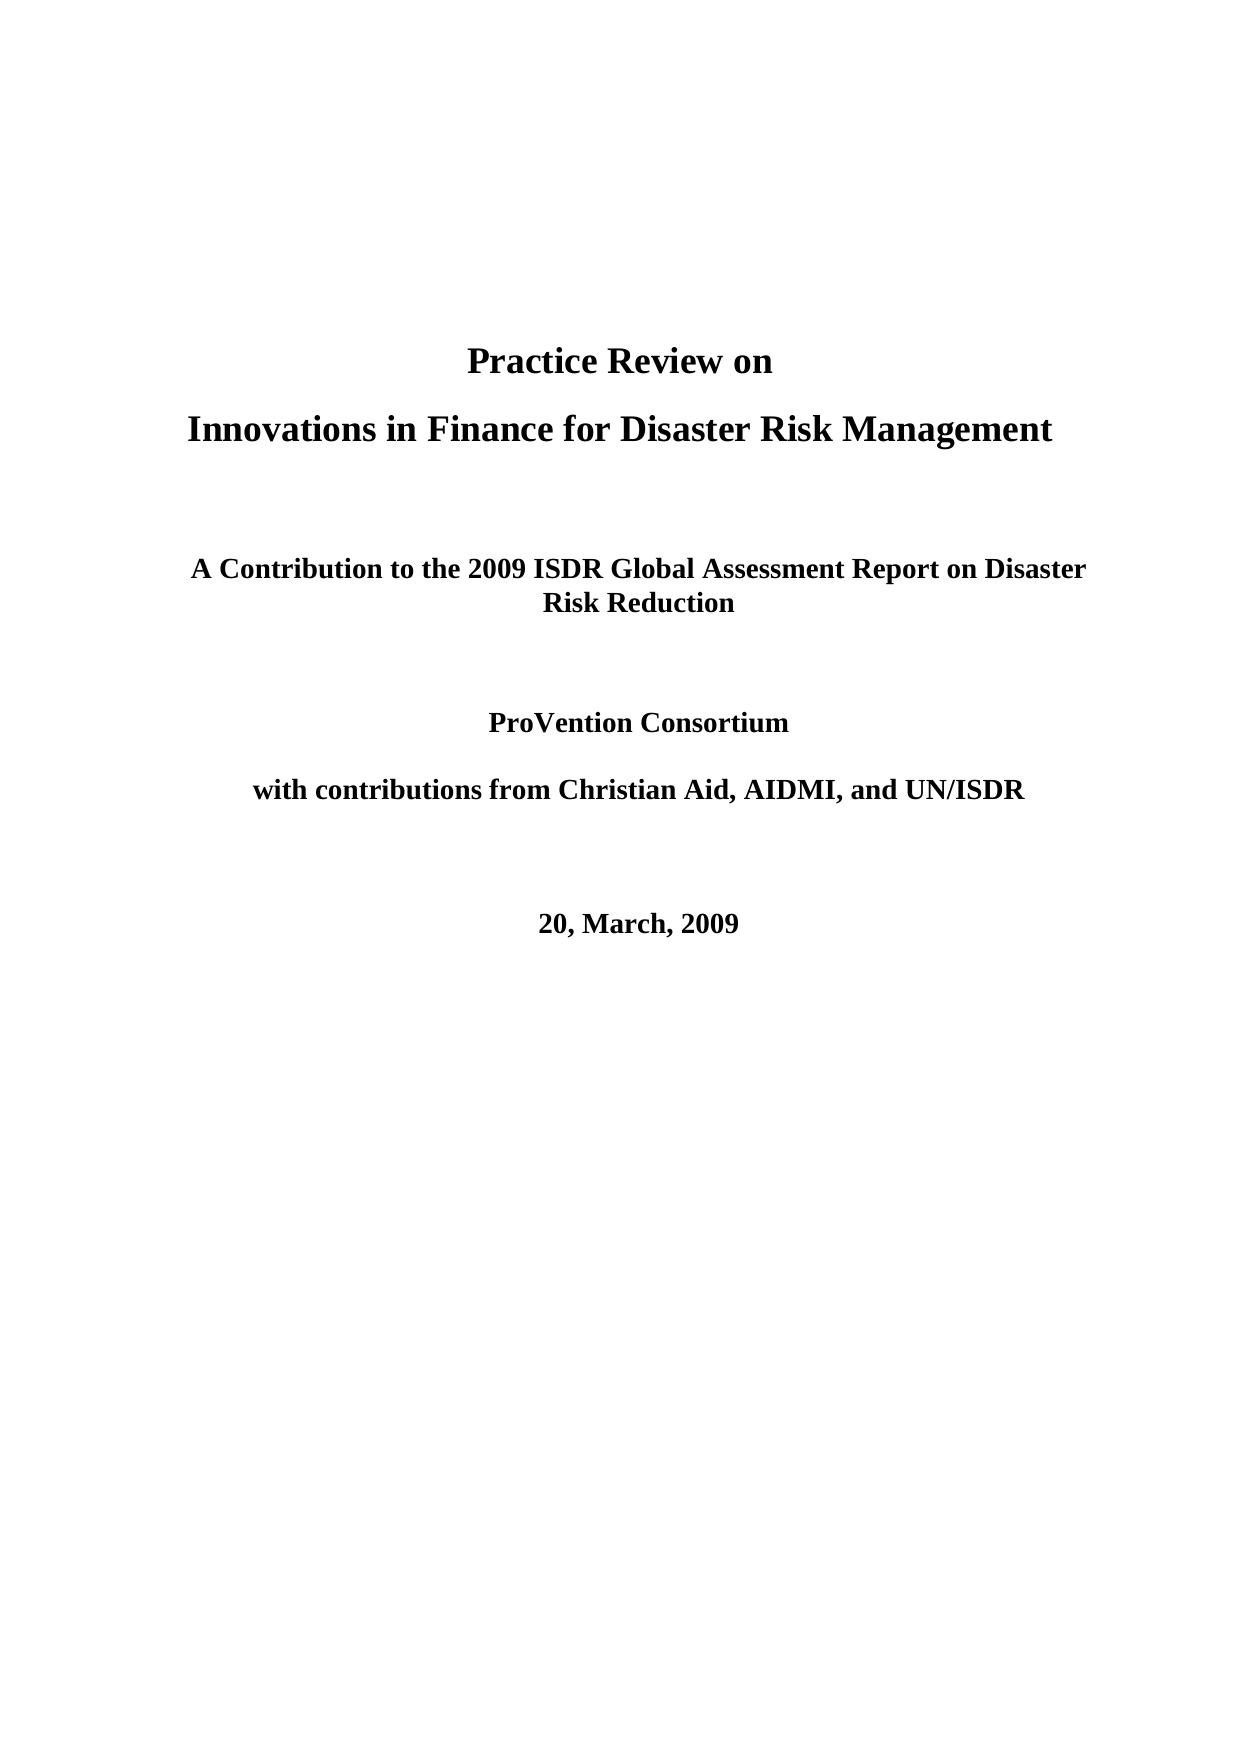 Microsoft Word - GAR - ProVention - Risk financing practice review - Mar 2009.doc